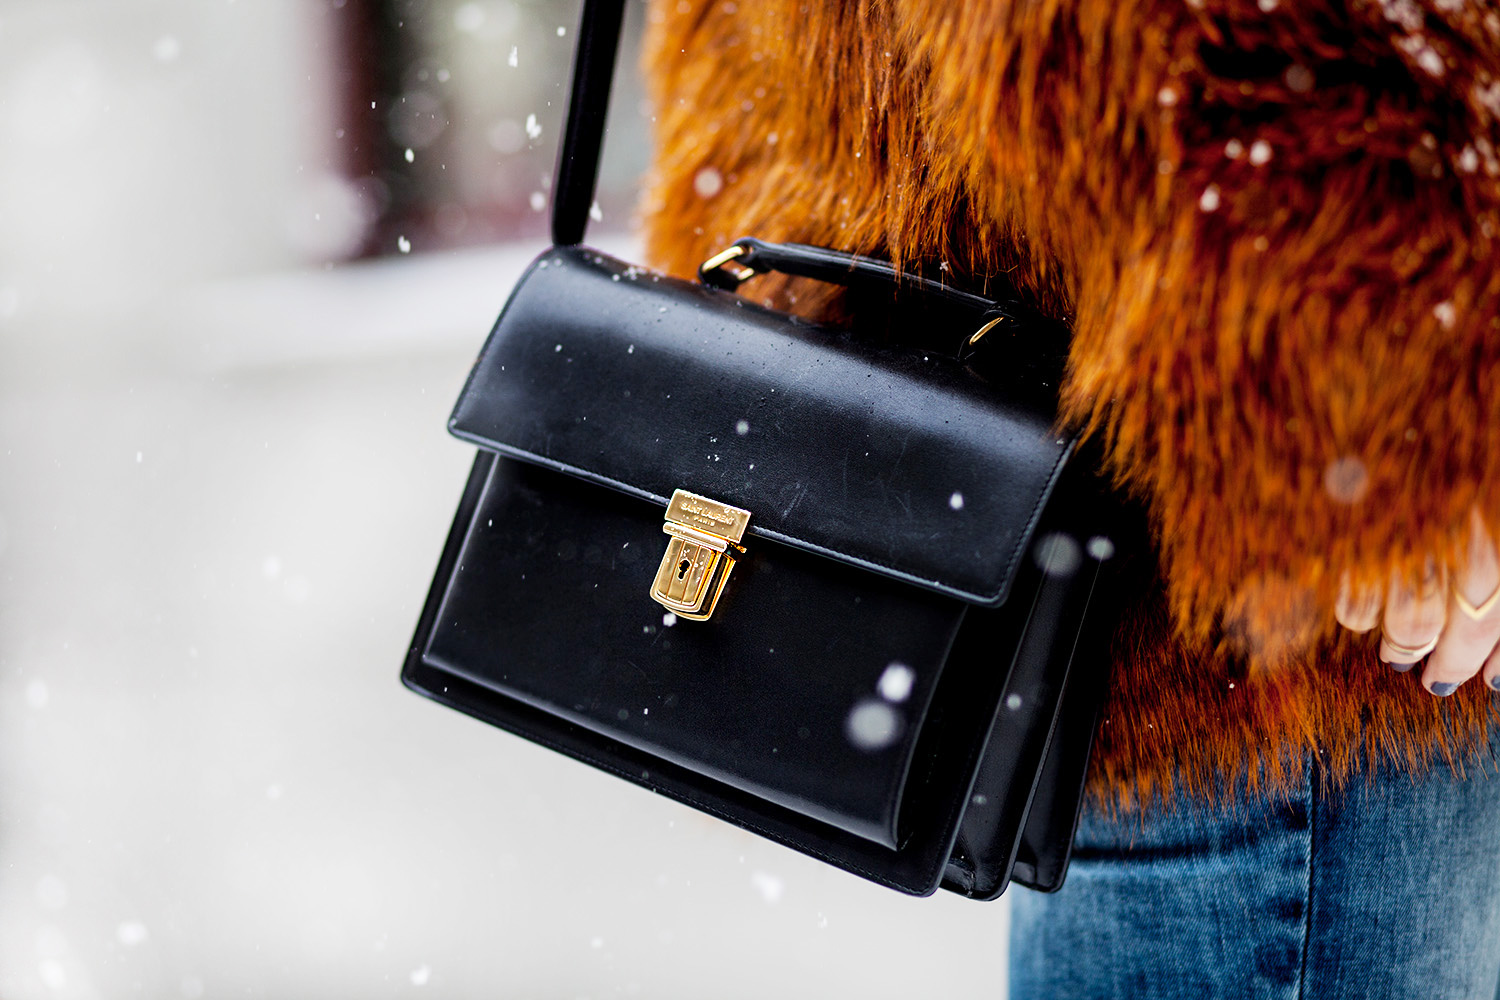 view all the details on my blog | winter wonderland outfit for minus degrees | fake fur coat from Weekday, blue jeans, Stuart Weitzman boots, Saint Laurent bag | street style, fashion, winter, warm, Berlin